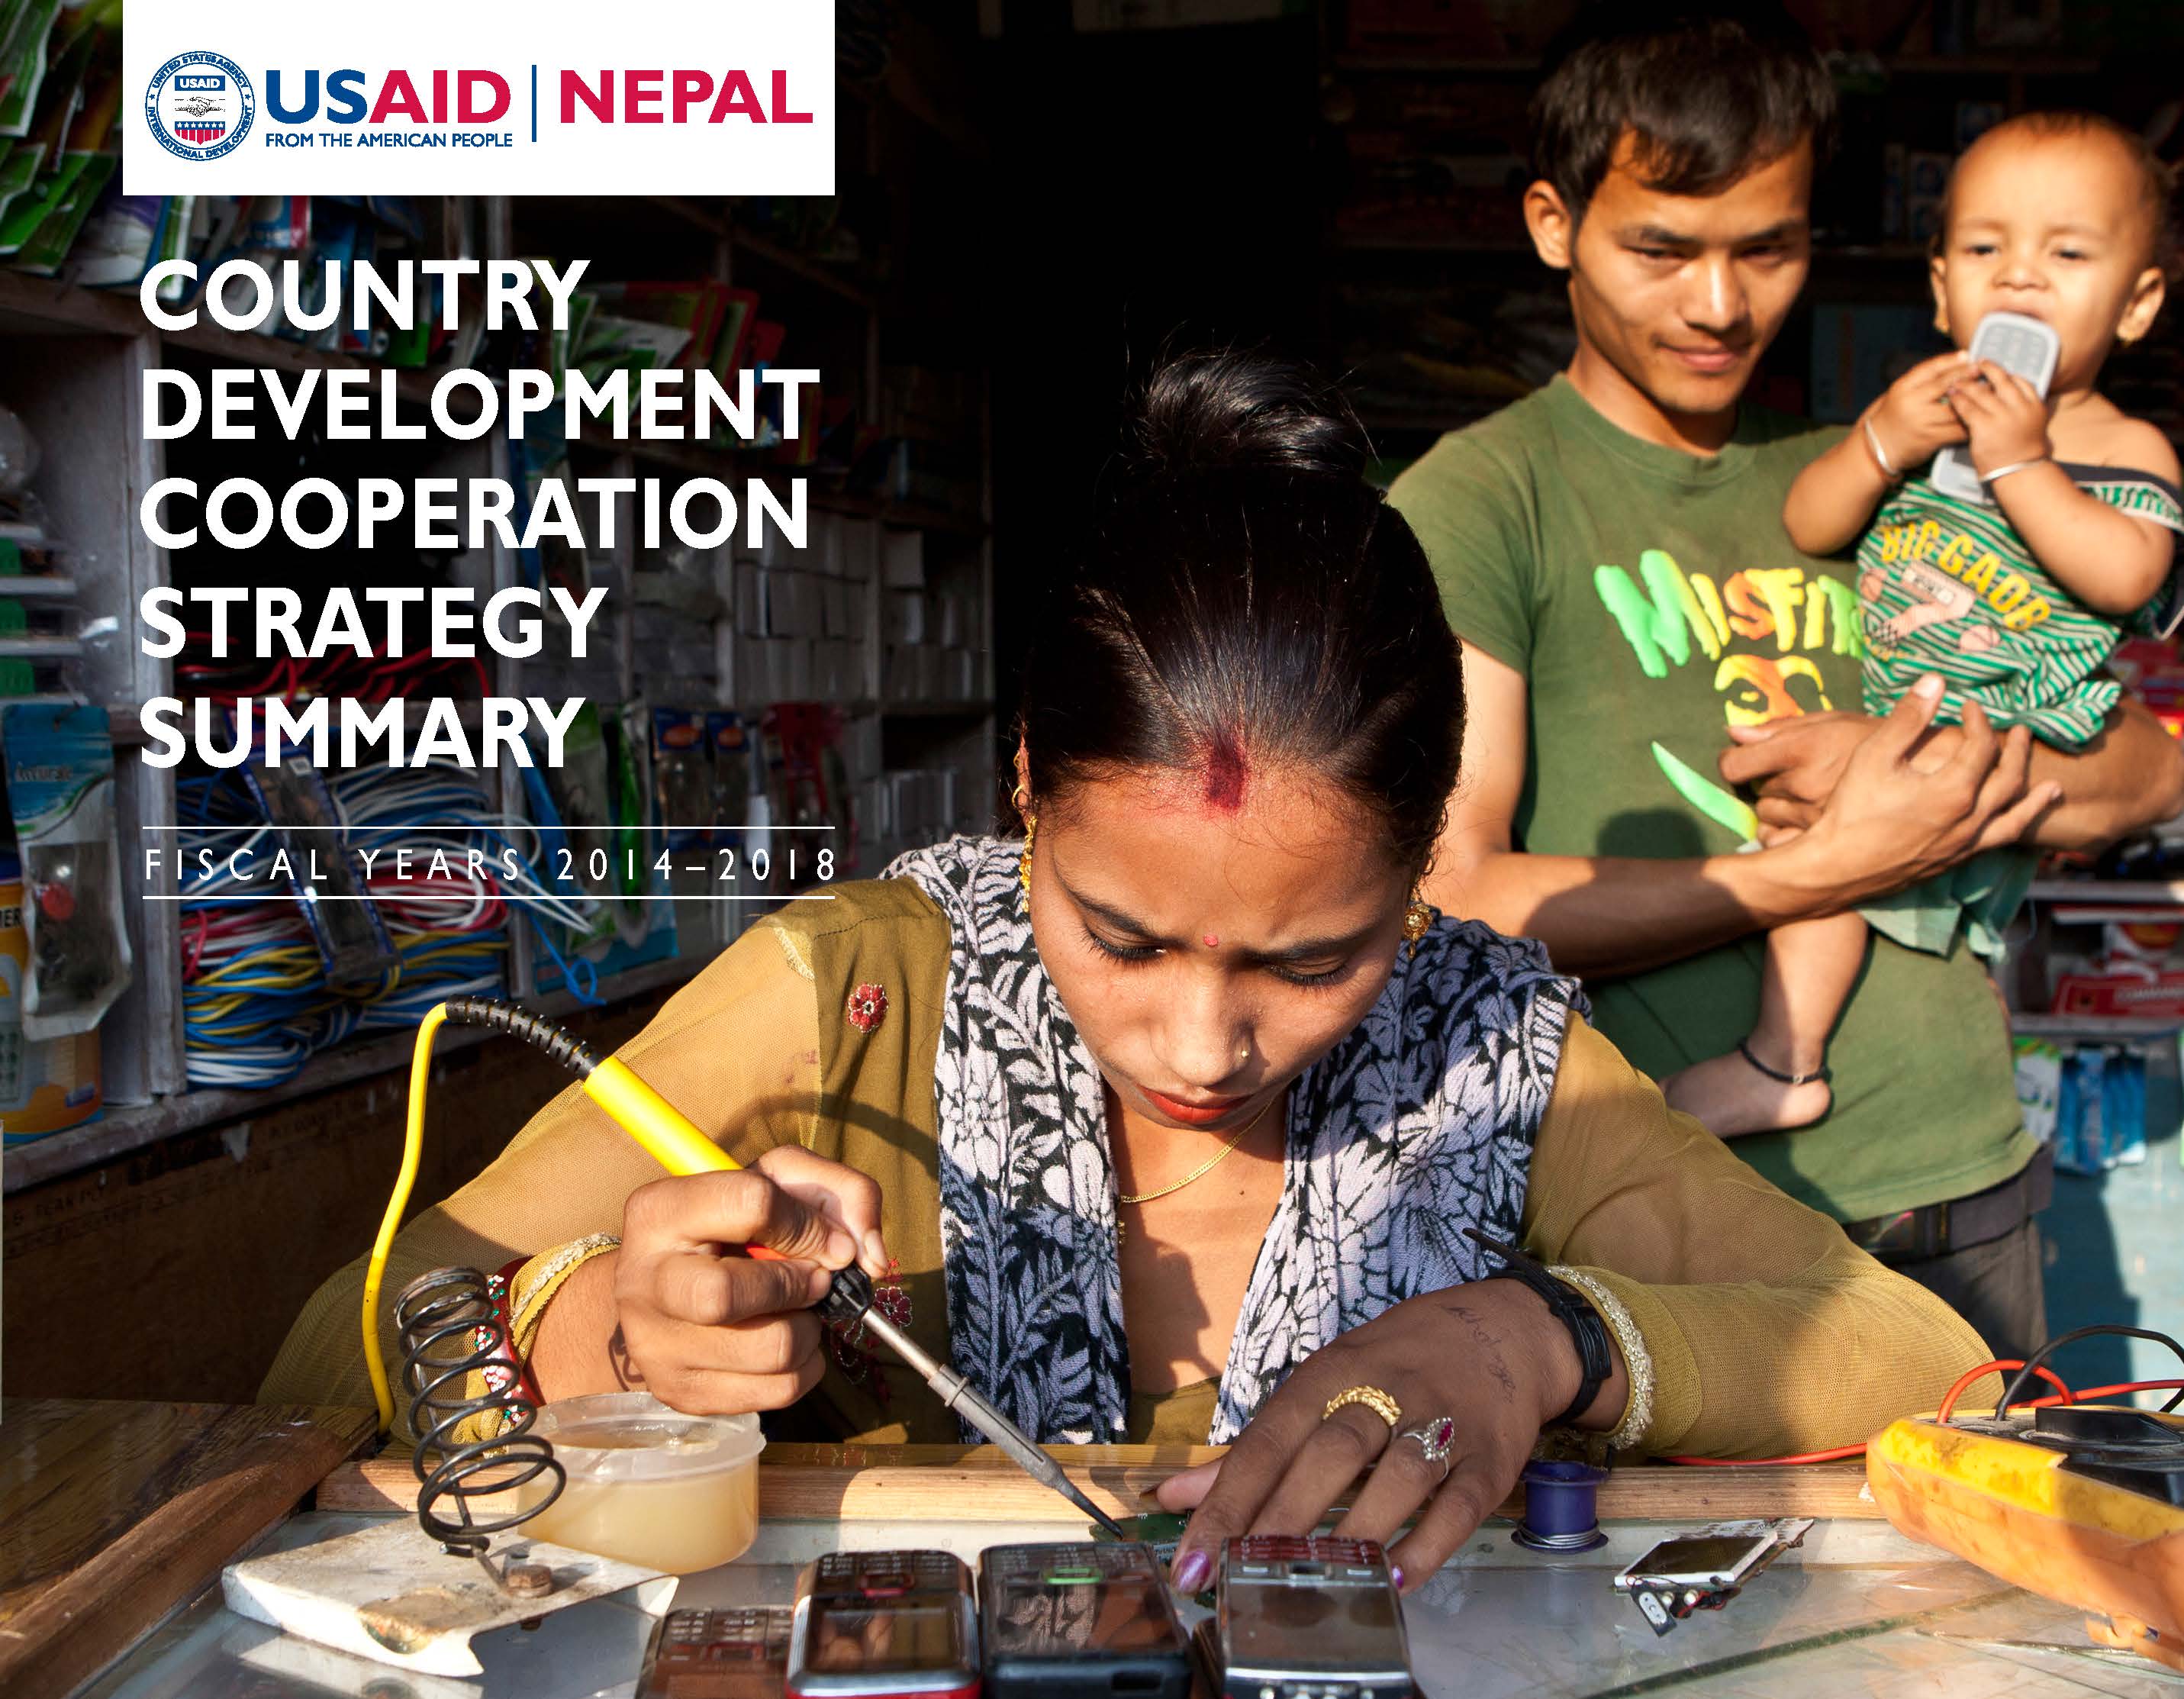 Nepal - Country Development Cooperation Strategy Summary (Fiscal year 2014-2018)